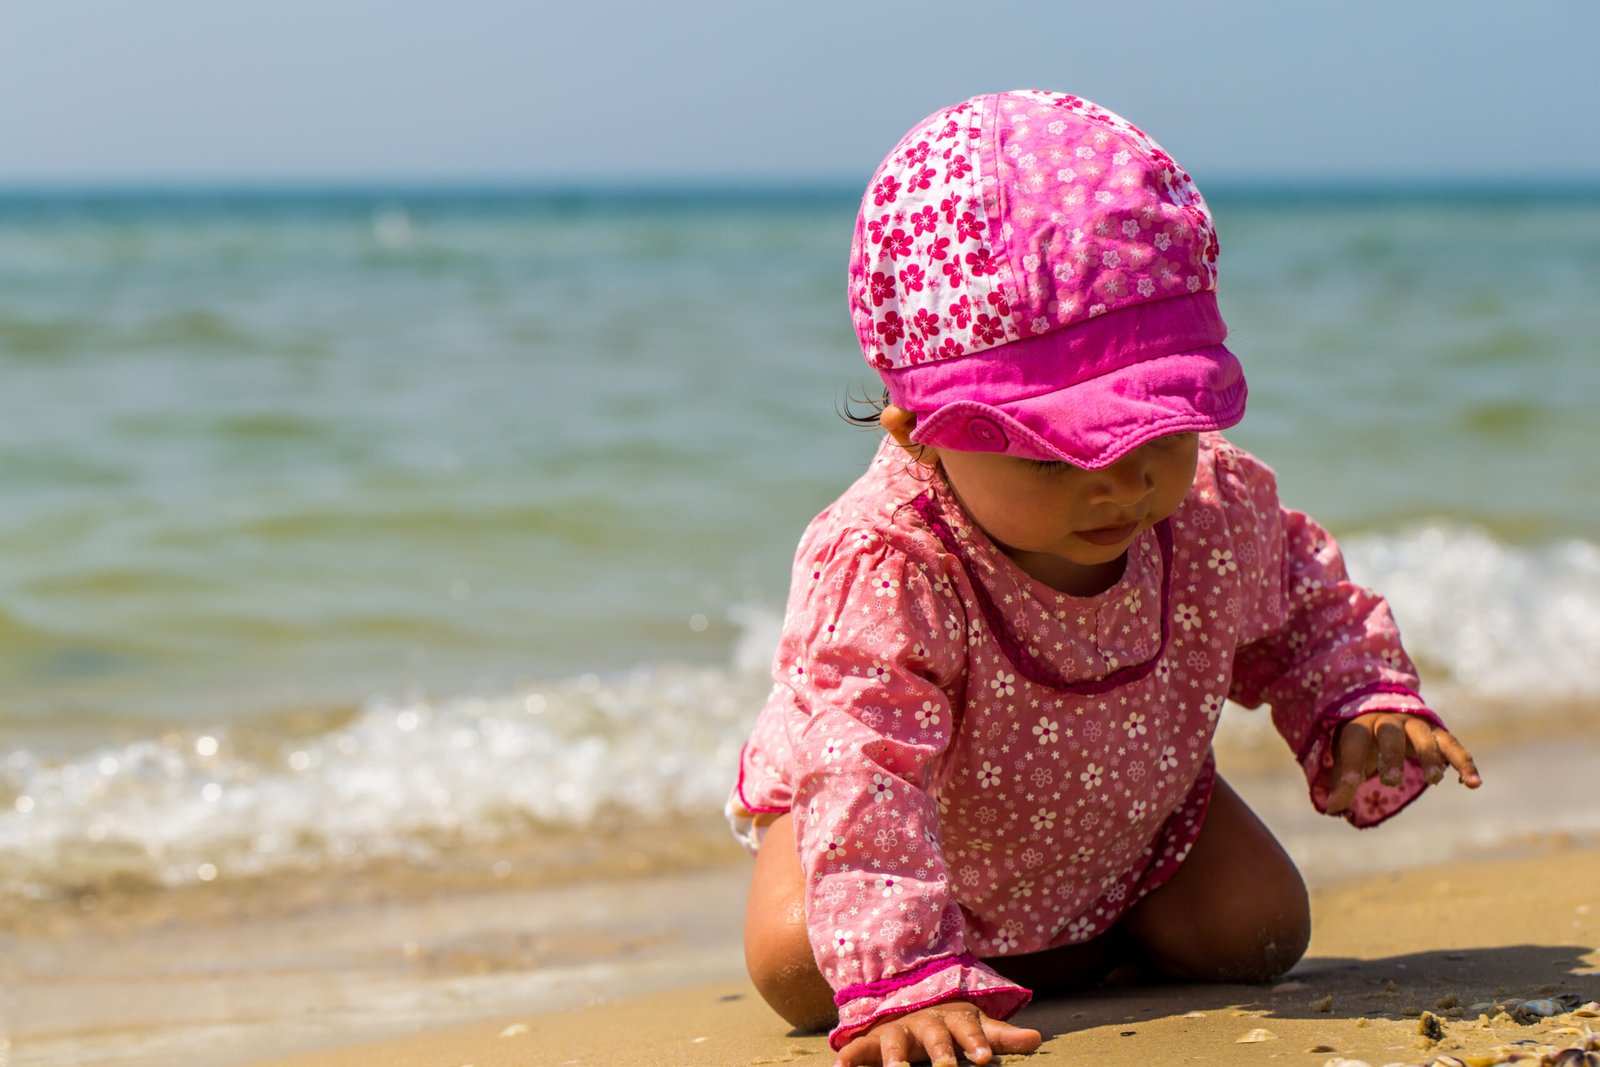 Baby Swimming Suit Guide: How to Choose, Wear, & Put on a Suit